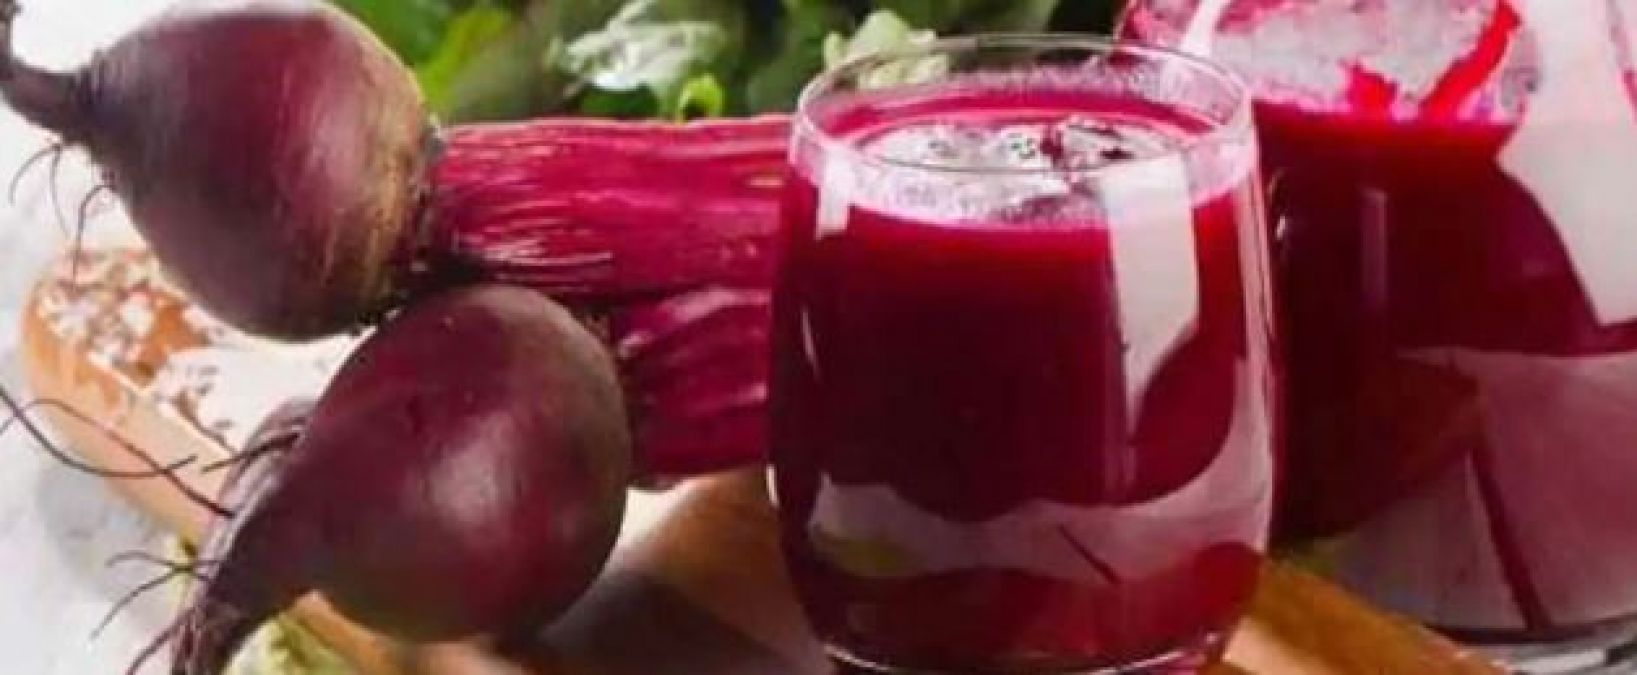 Beetroot is best for hairs, know its benefits